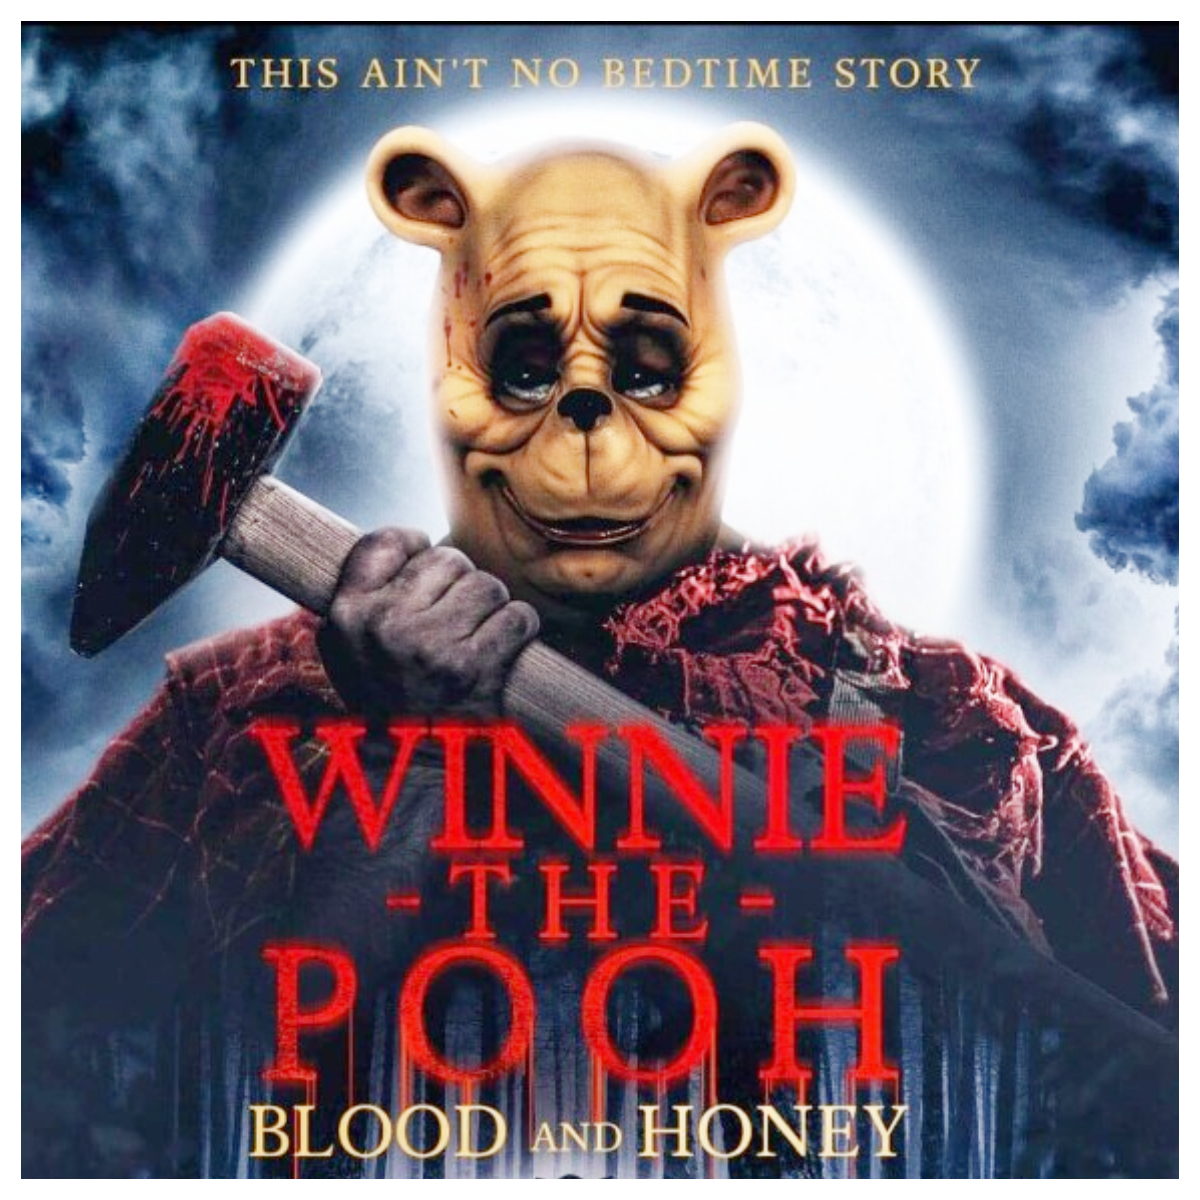 Winnie the Pooh: Blood and Honey- 10 Facts about the dark version ...